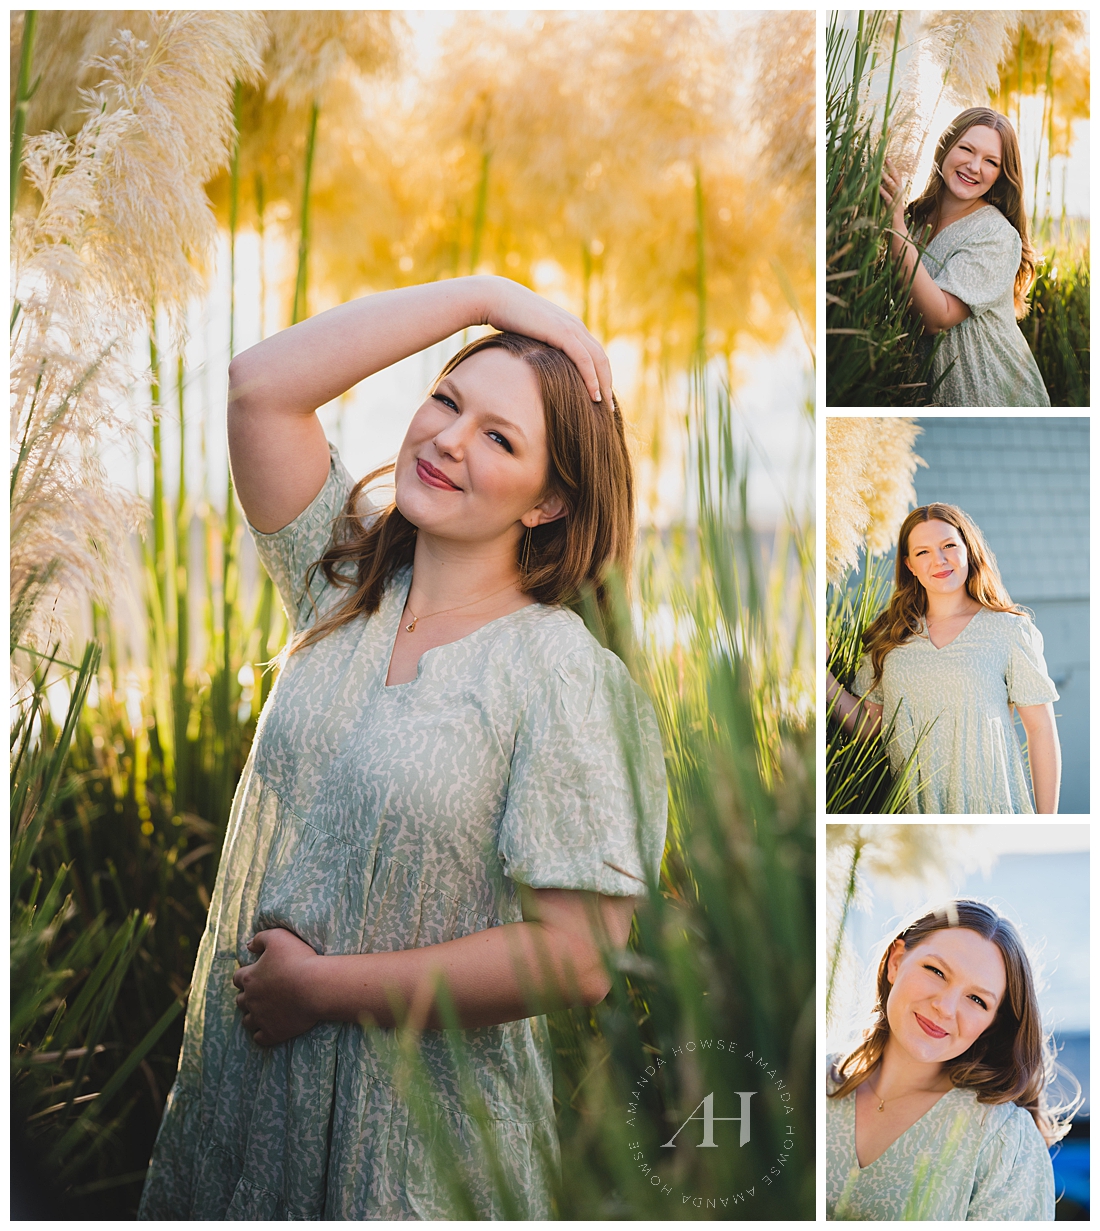 Sage Green Senior Portraits | Fun Poses for Outdoor Portraits | Photographed by the Best Tacoma Senior Photographer Amanda Howse Photography